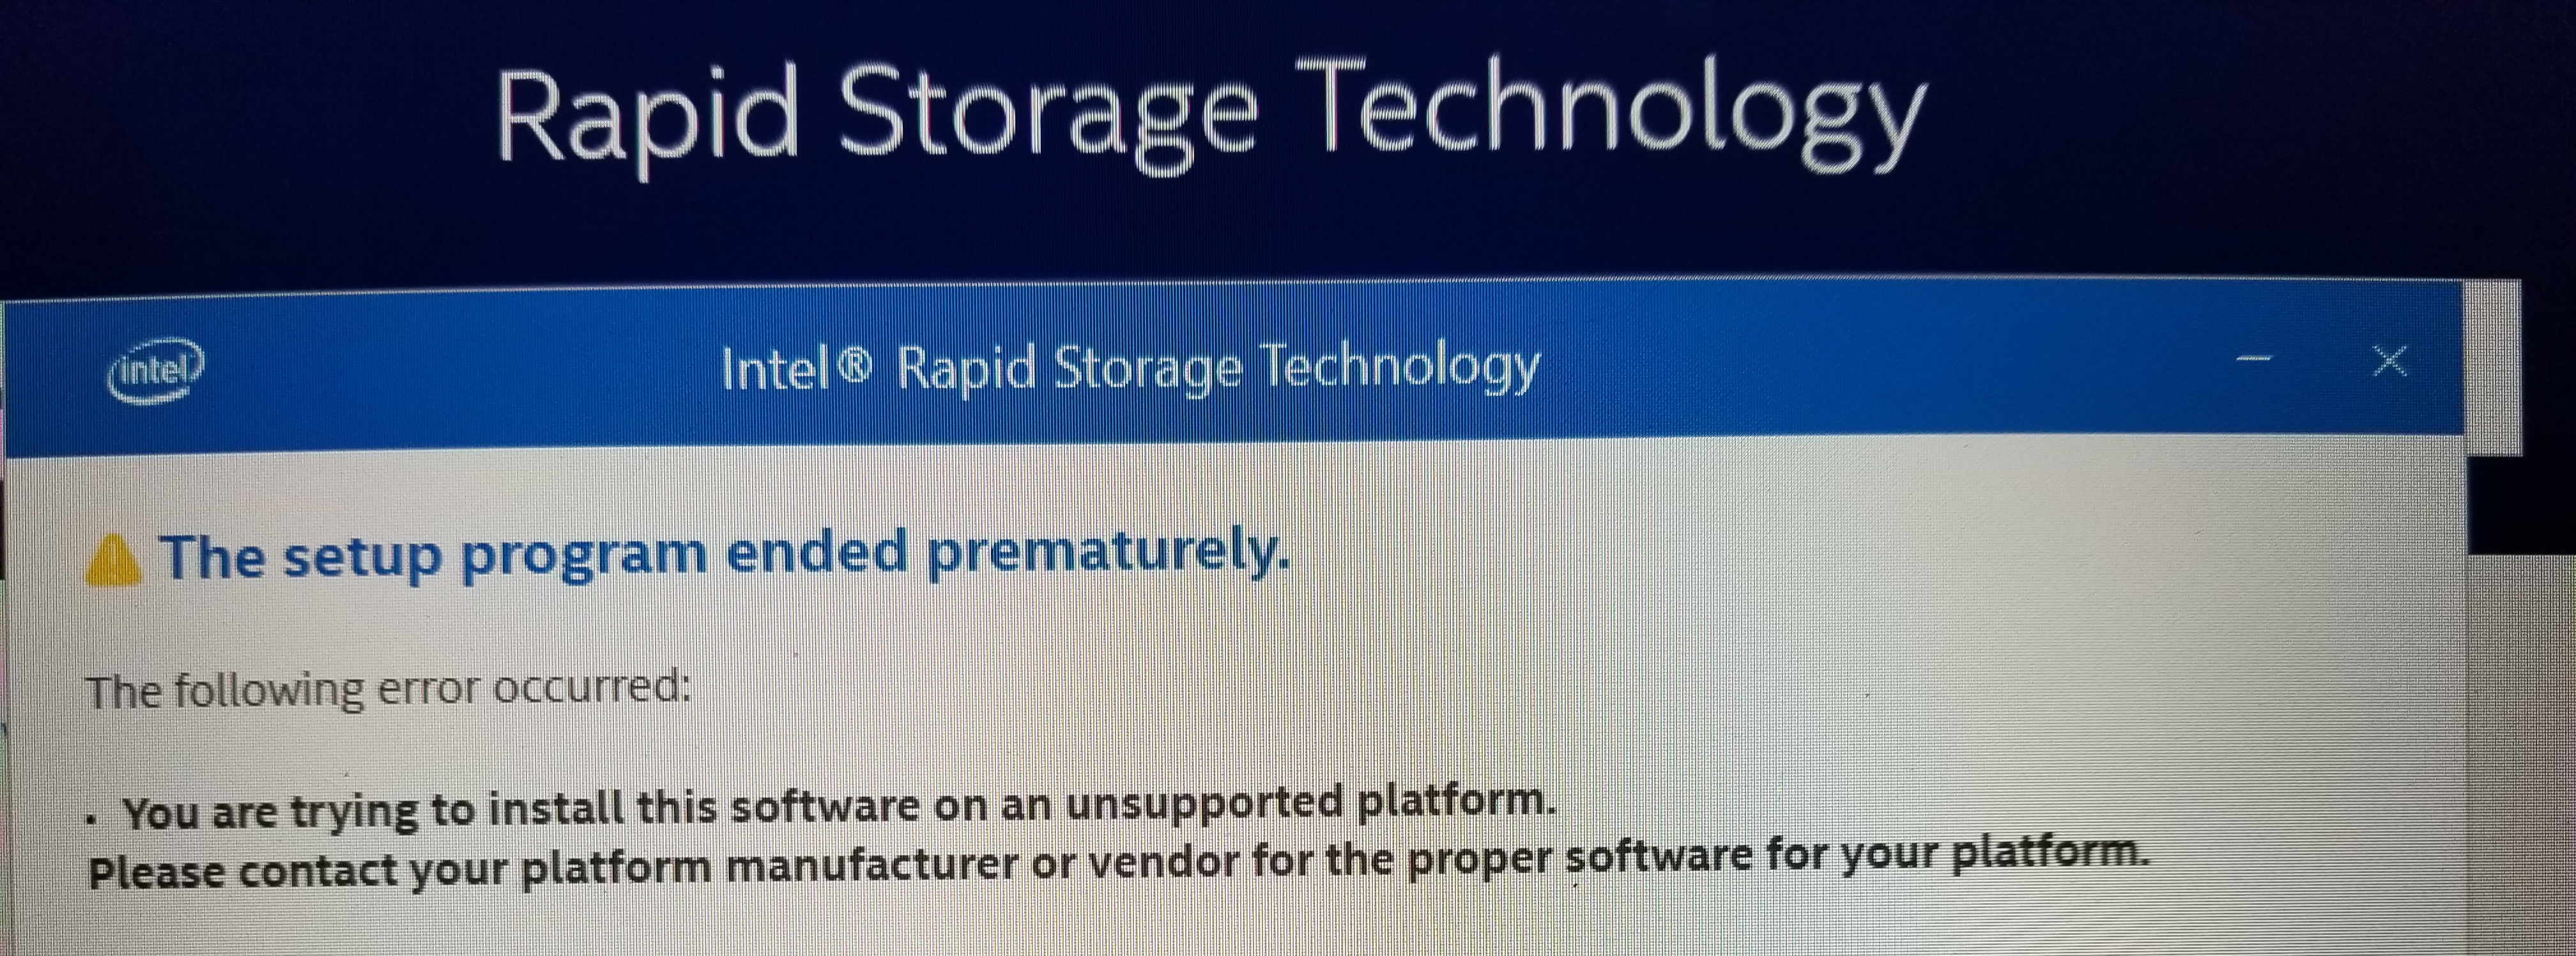 Intel Rapid Storage Technology unsupported platform - HP Support Community  - 8186466